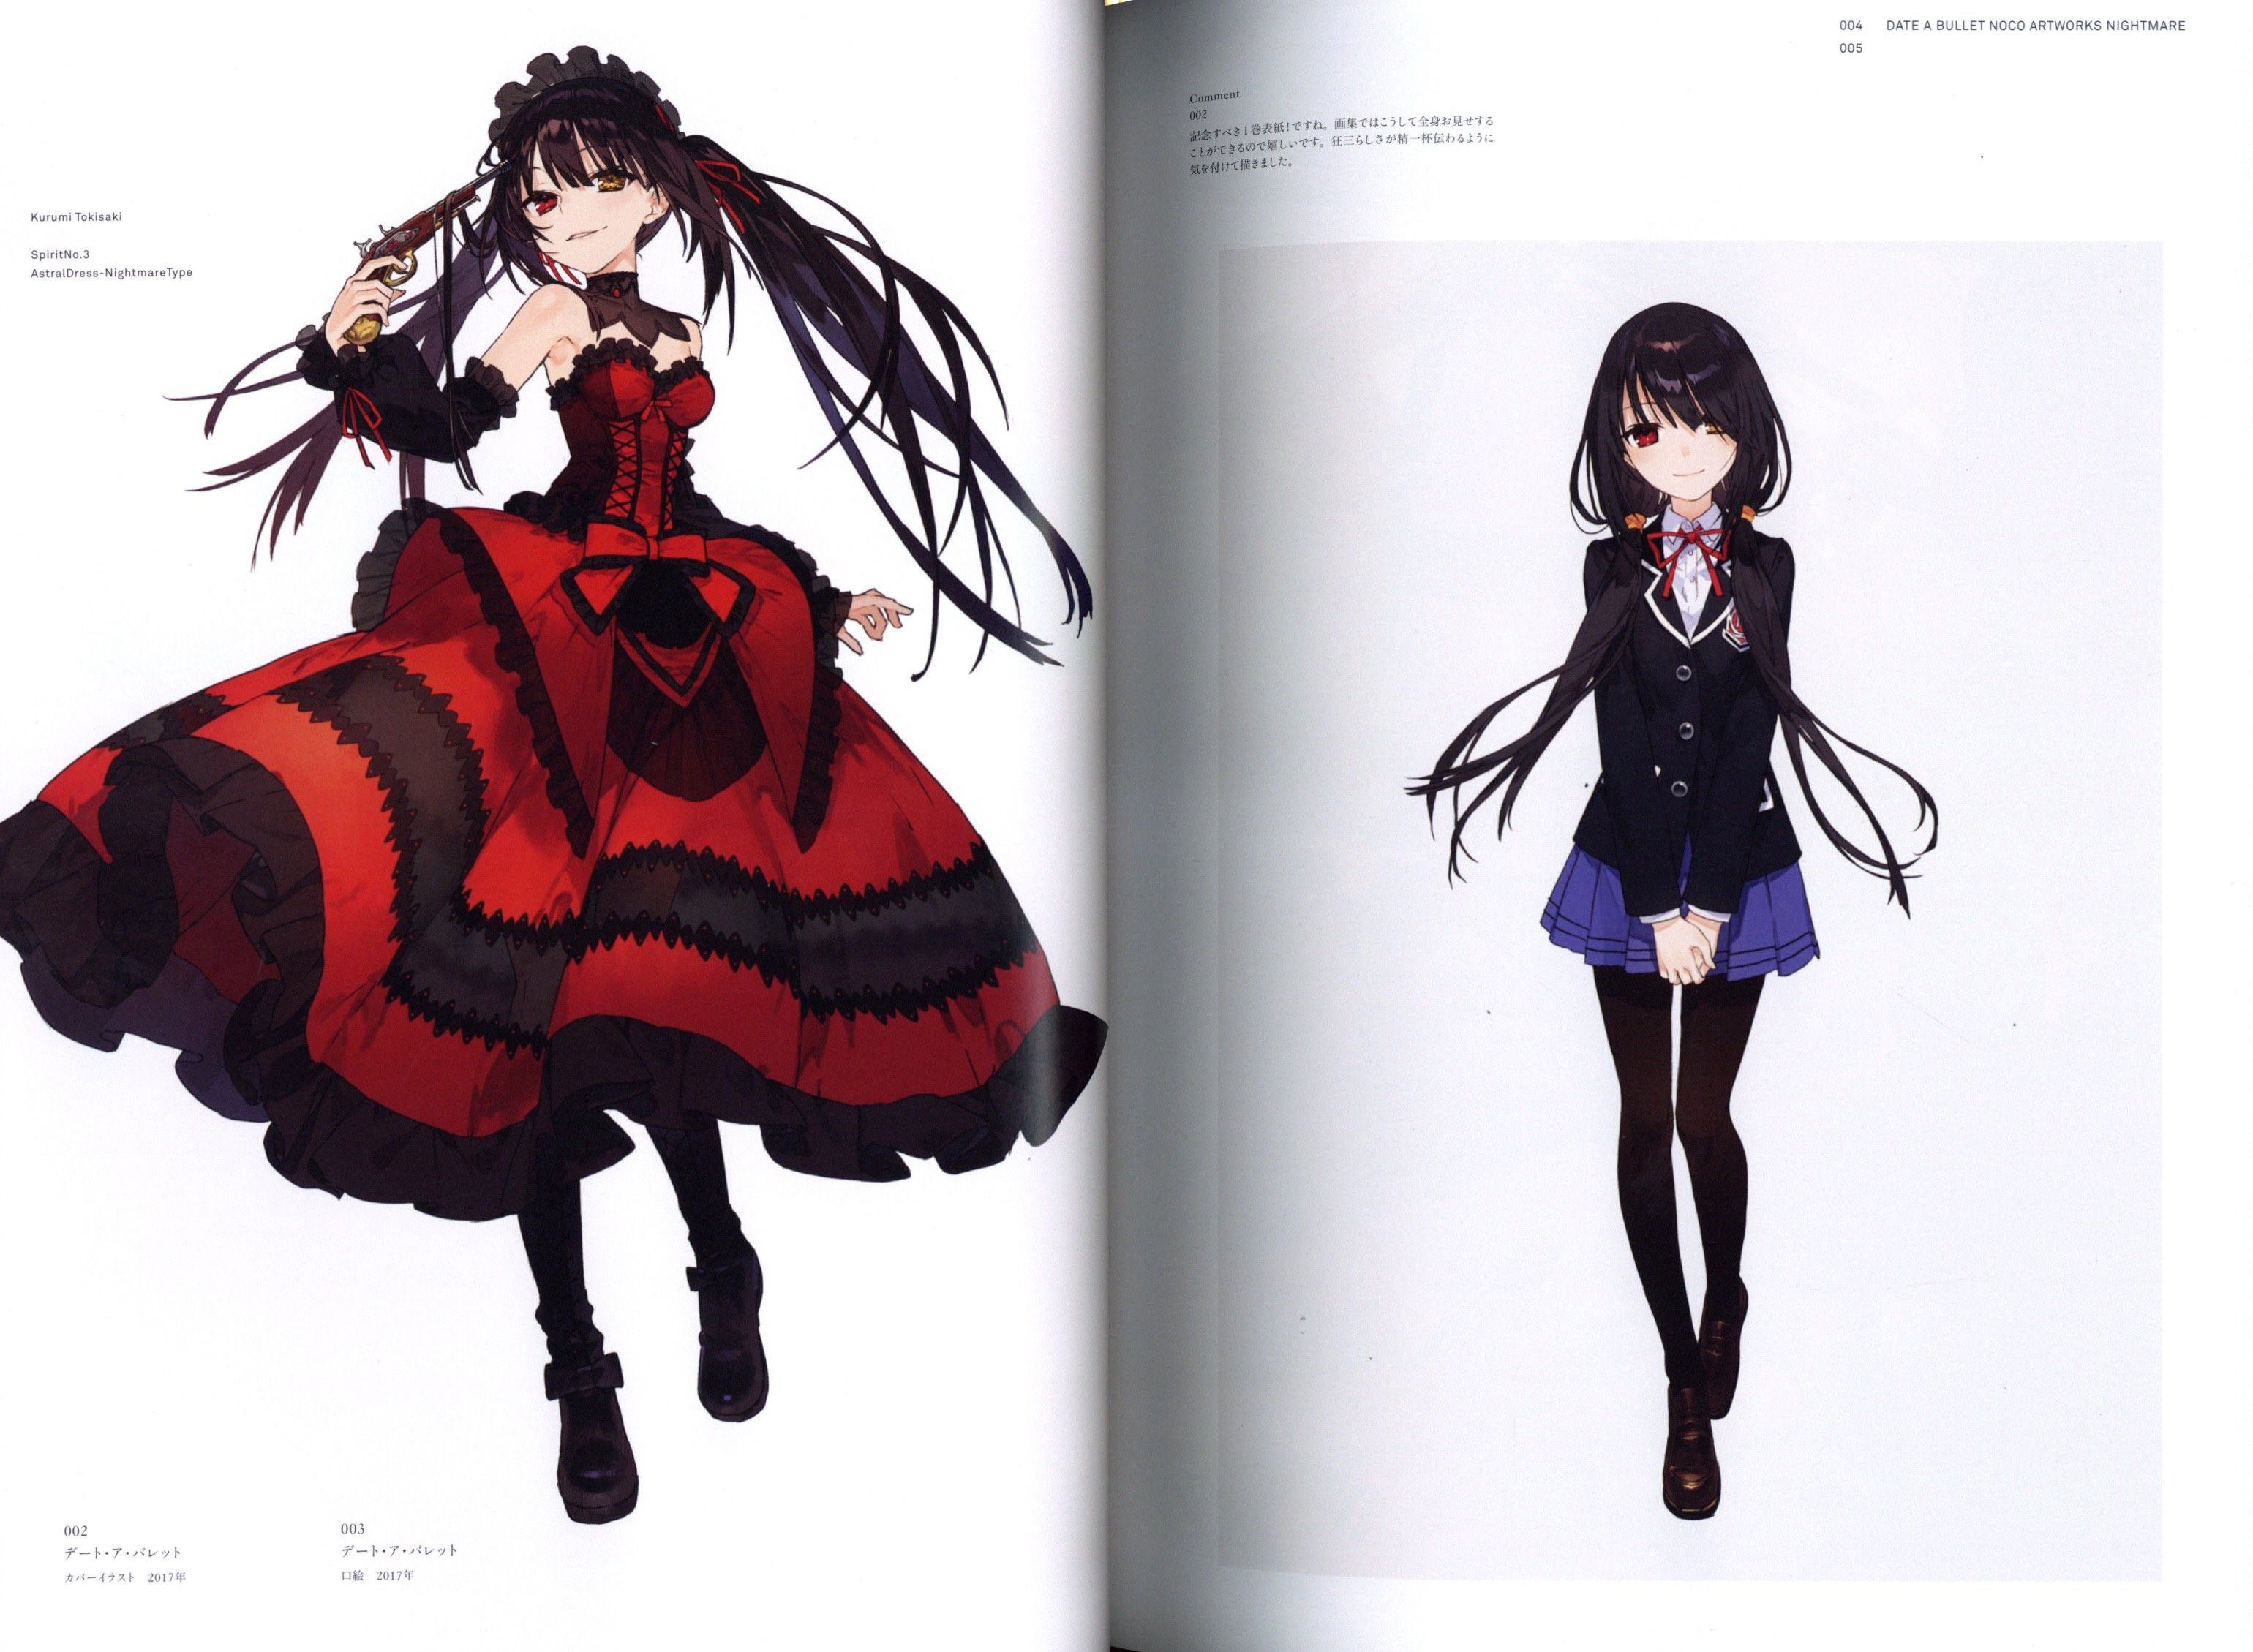 Date A Live - Date a Bullet Characters (in NOCO style) was